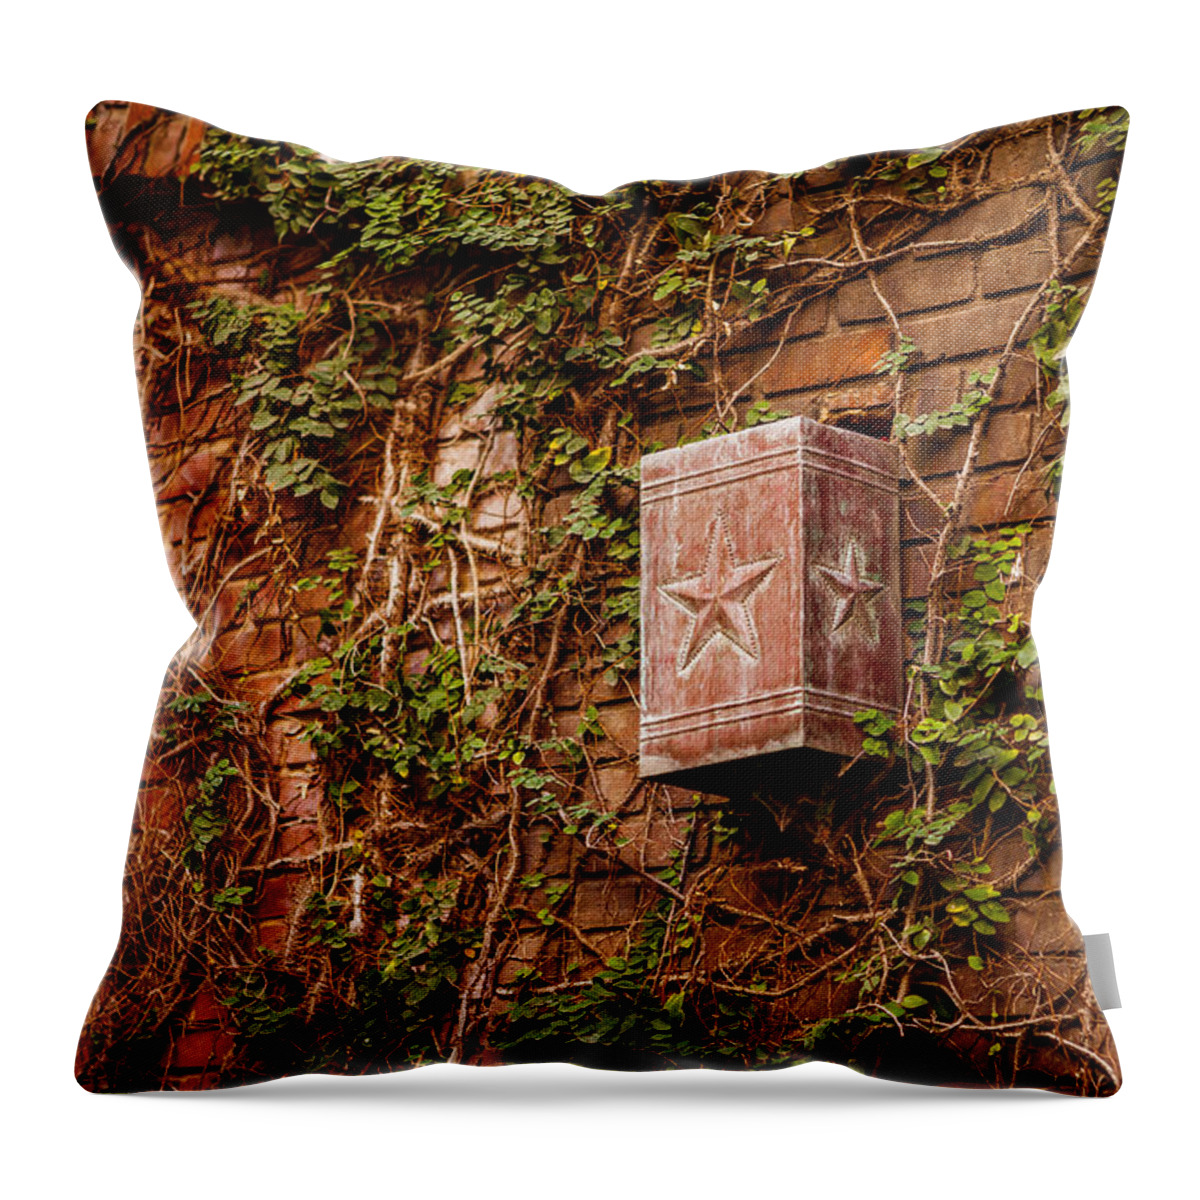 Downtown Throw Pillow featuring the photograph Ivy League Star by Melinda Ledsome